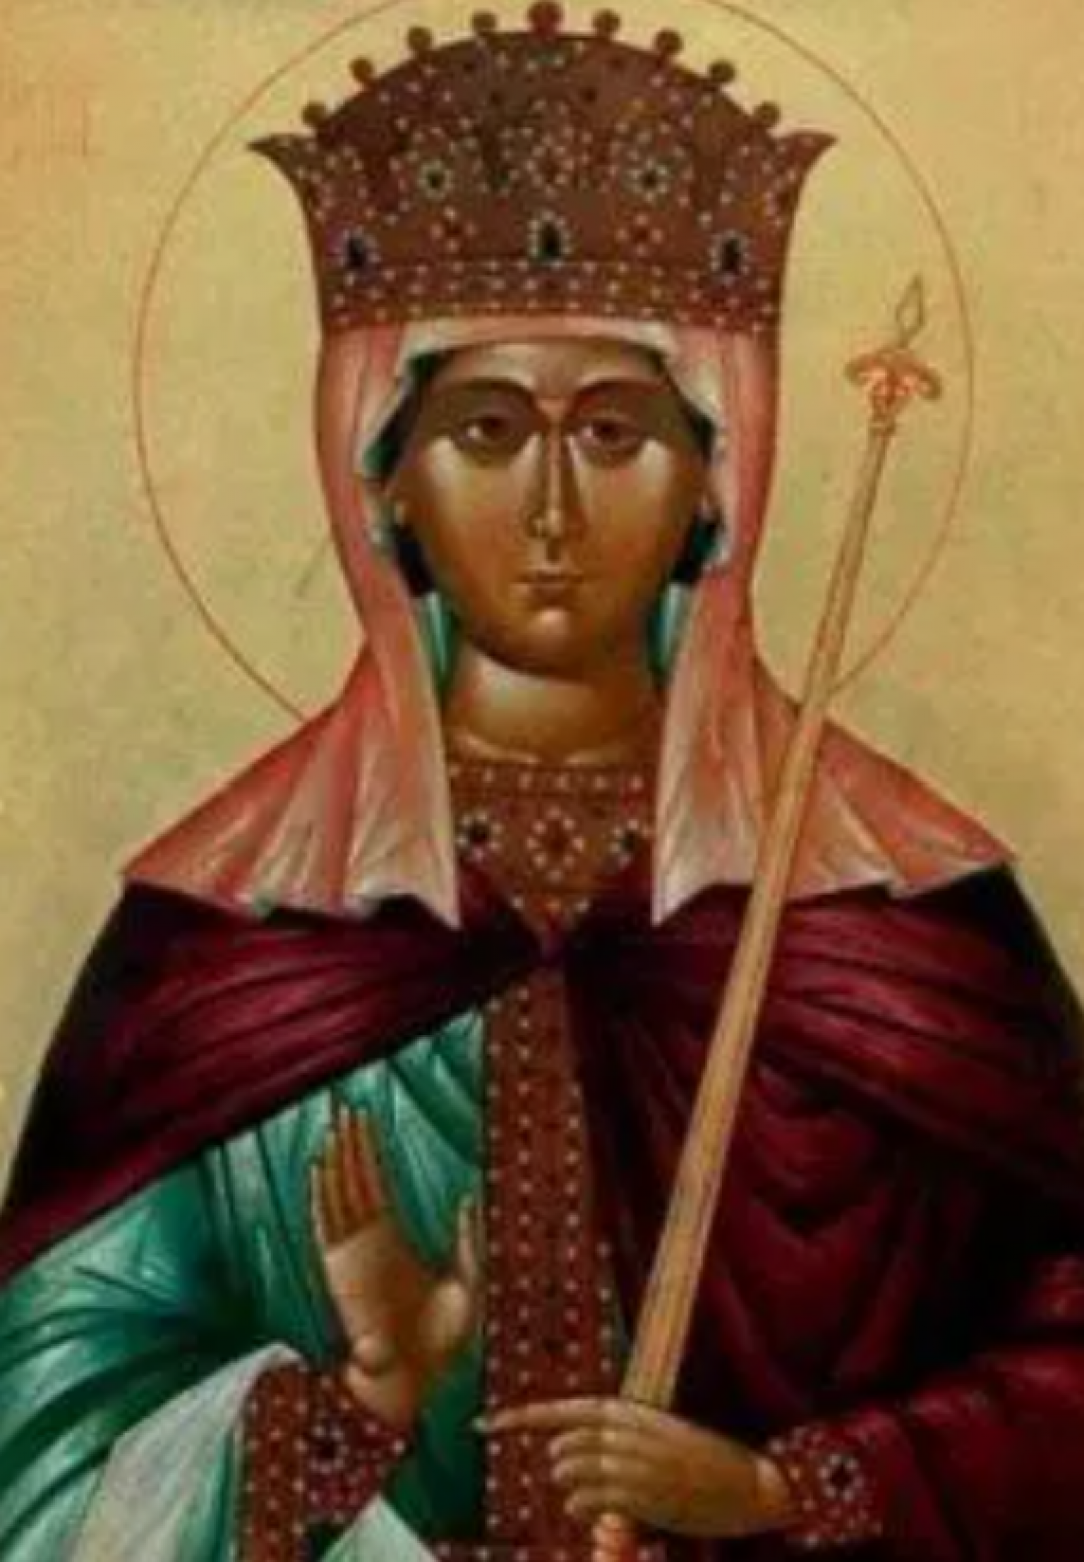 24th of February is the Feast of Saint Adela